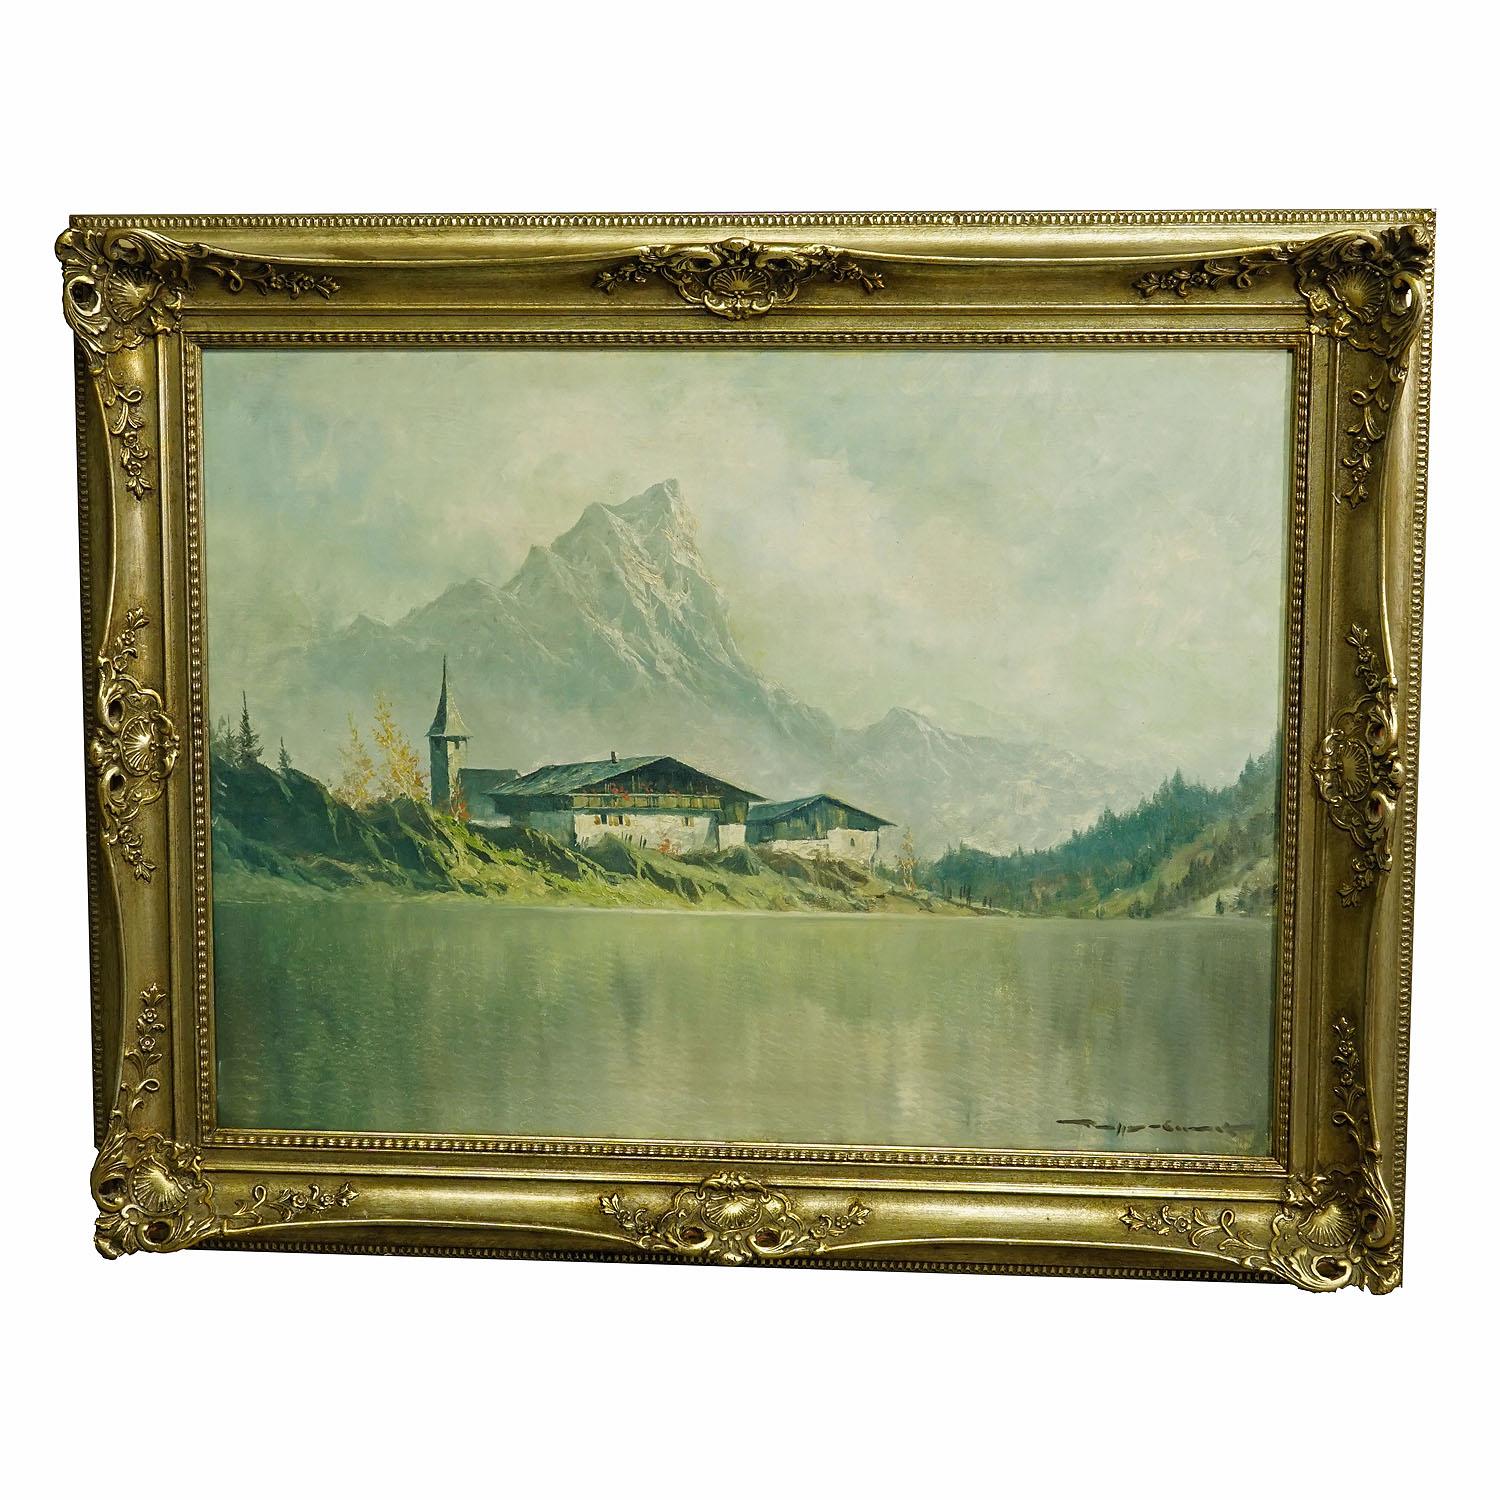 High Mountain Landscape with Alpine Lake near Kufstein, circa 1950s

A large impressionistic oil painting depicting a high mountain landscape with mountain lake and folksy mountain hut in front of the imperial mountains (Kaisergebirge) near Kufstein